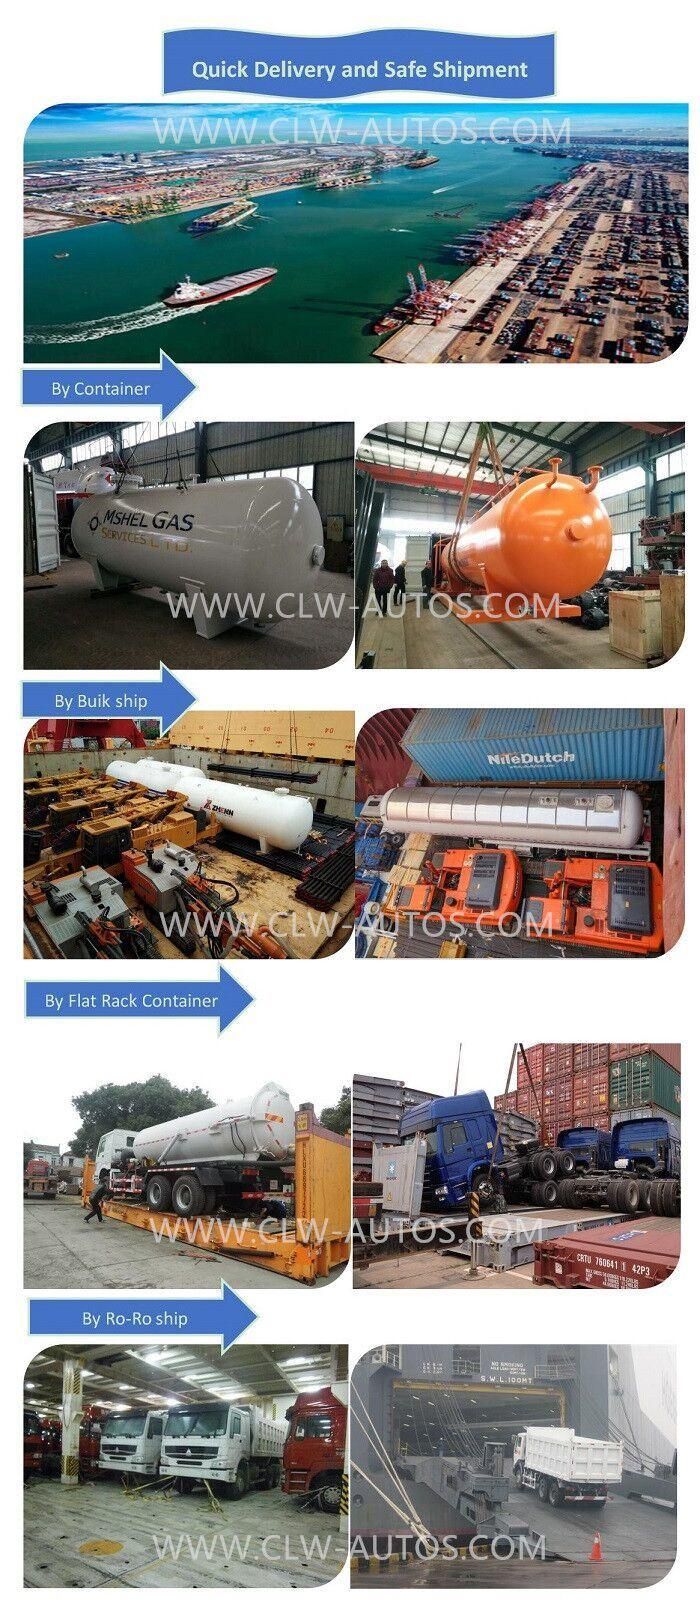 Dongfeng Tianjin DFAC 10-14cbm Garbage Compactor Truck Compressed Garbage Collecation Trucks